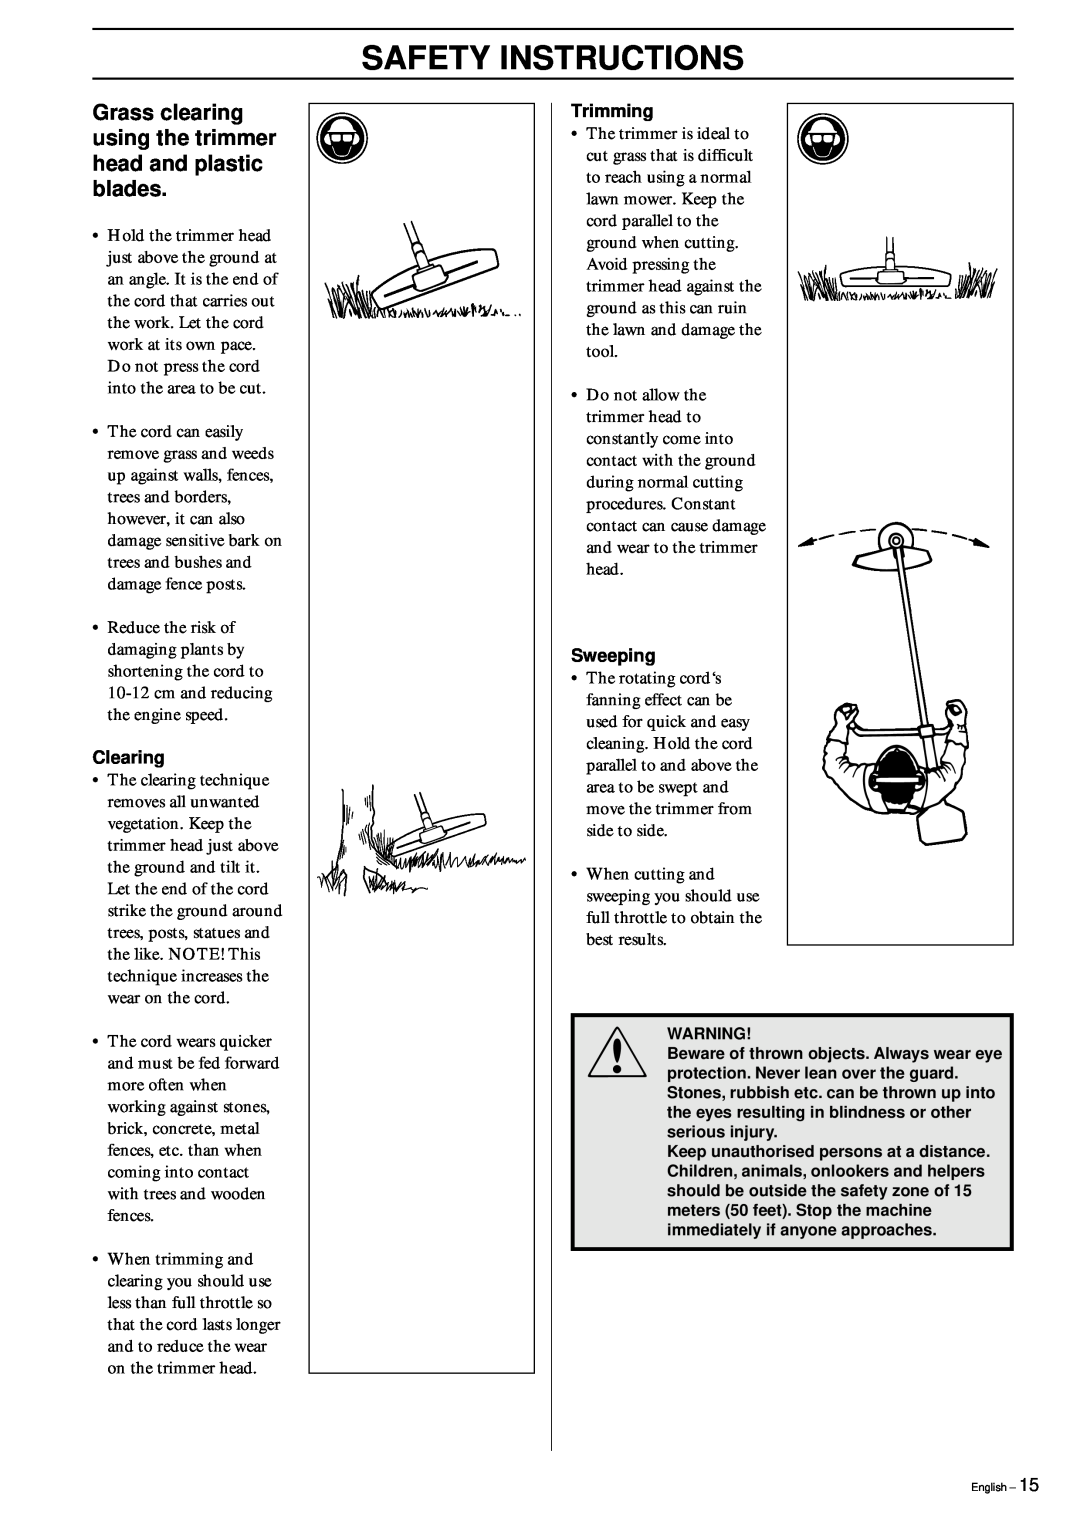 Husqvarna 326RX manual Safety Instructions, Grass clearing using the trimmer head and plastic blades, Clearing, Trimming 